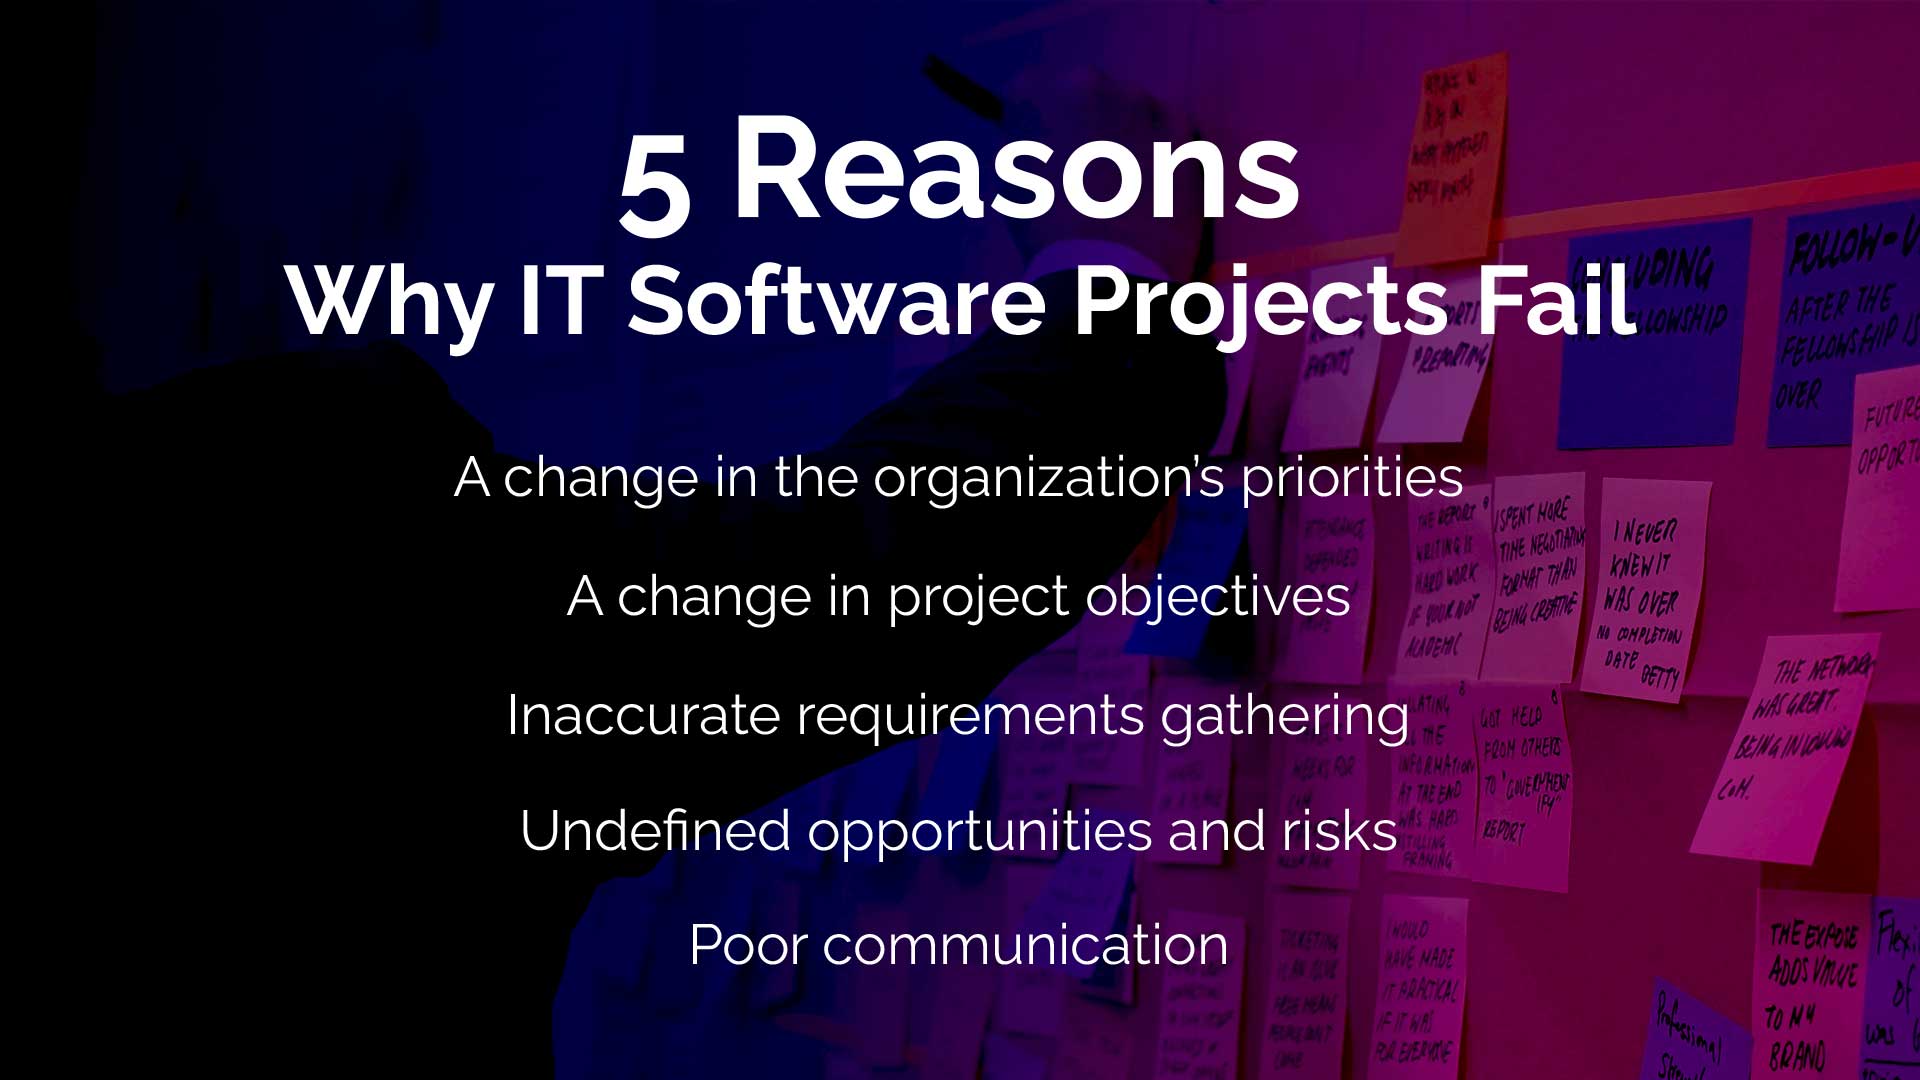 5 Reasons Why IT Software Projects Fail